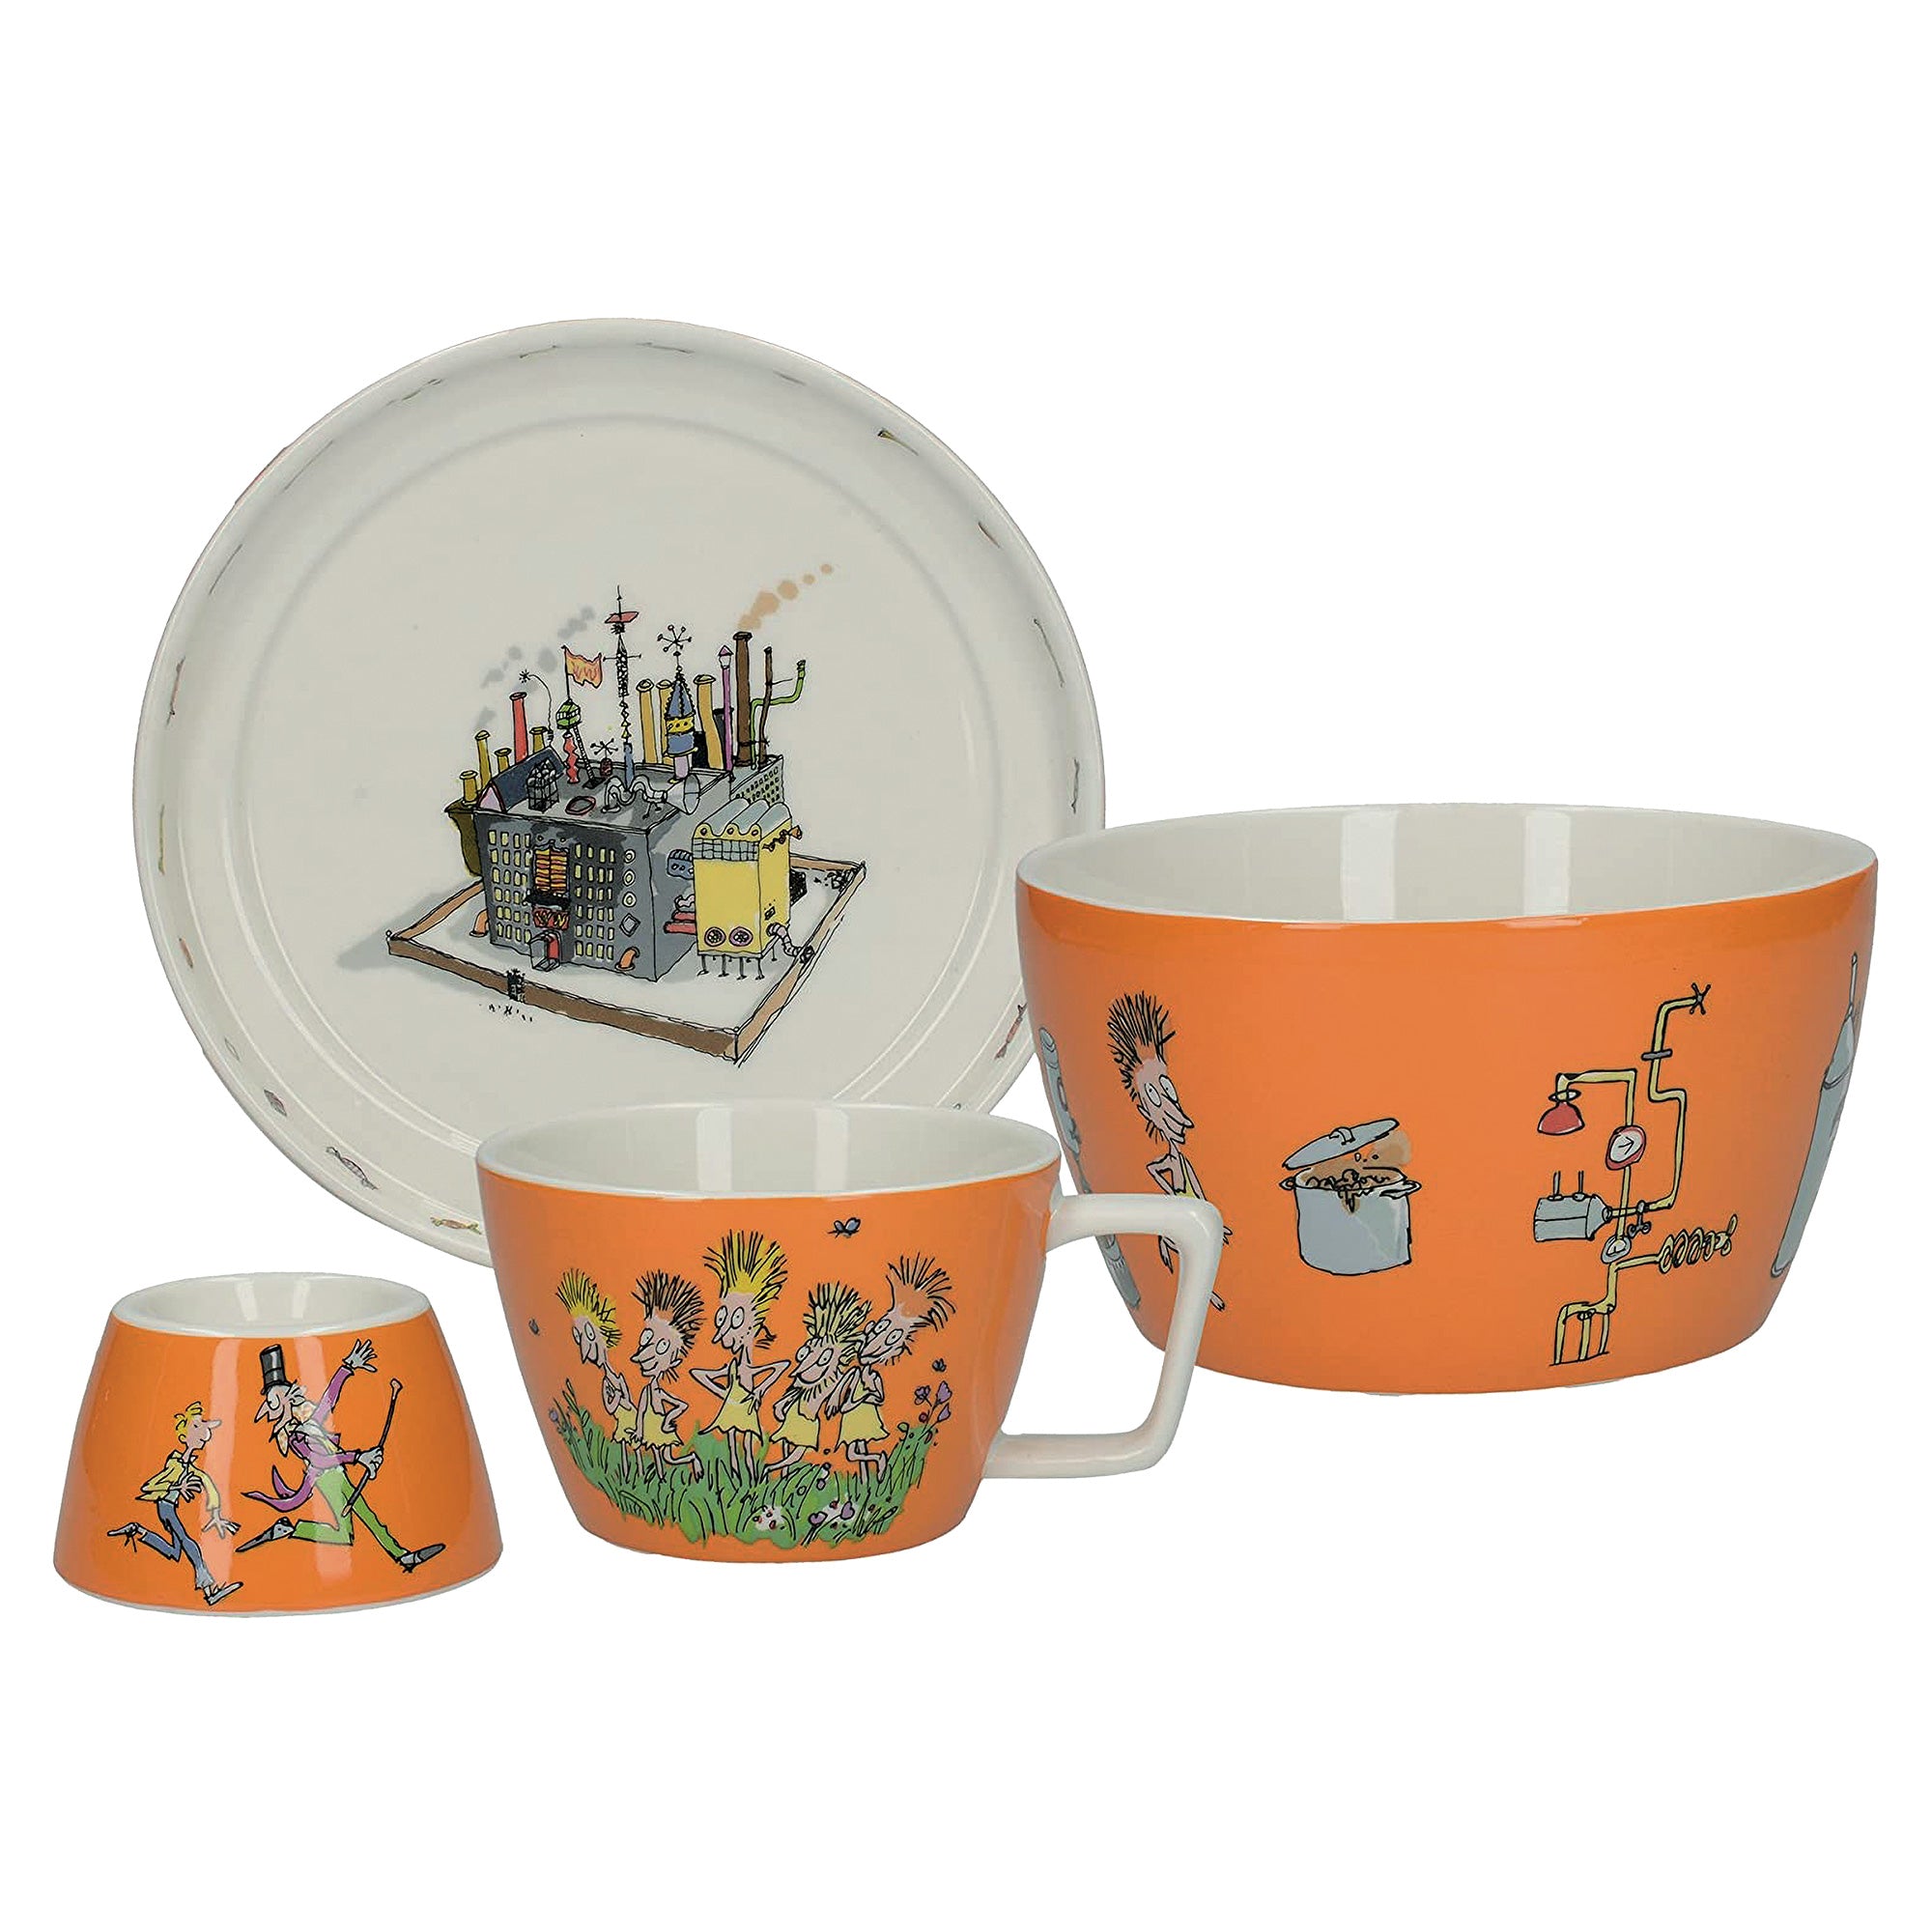 4pce Stackable Ceramic Breakfast Set - Charlie & The Chocolate Factory Breakfast Set